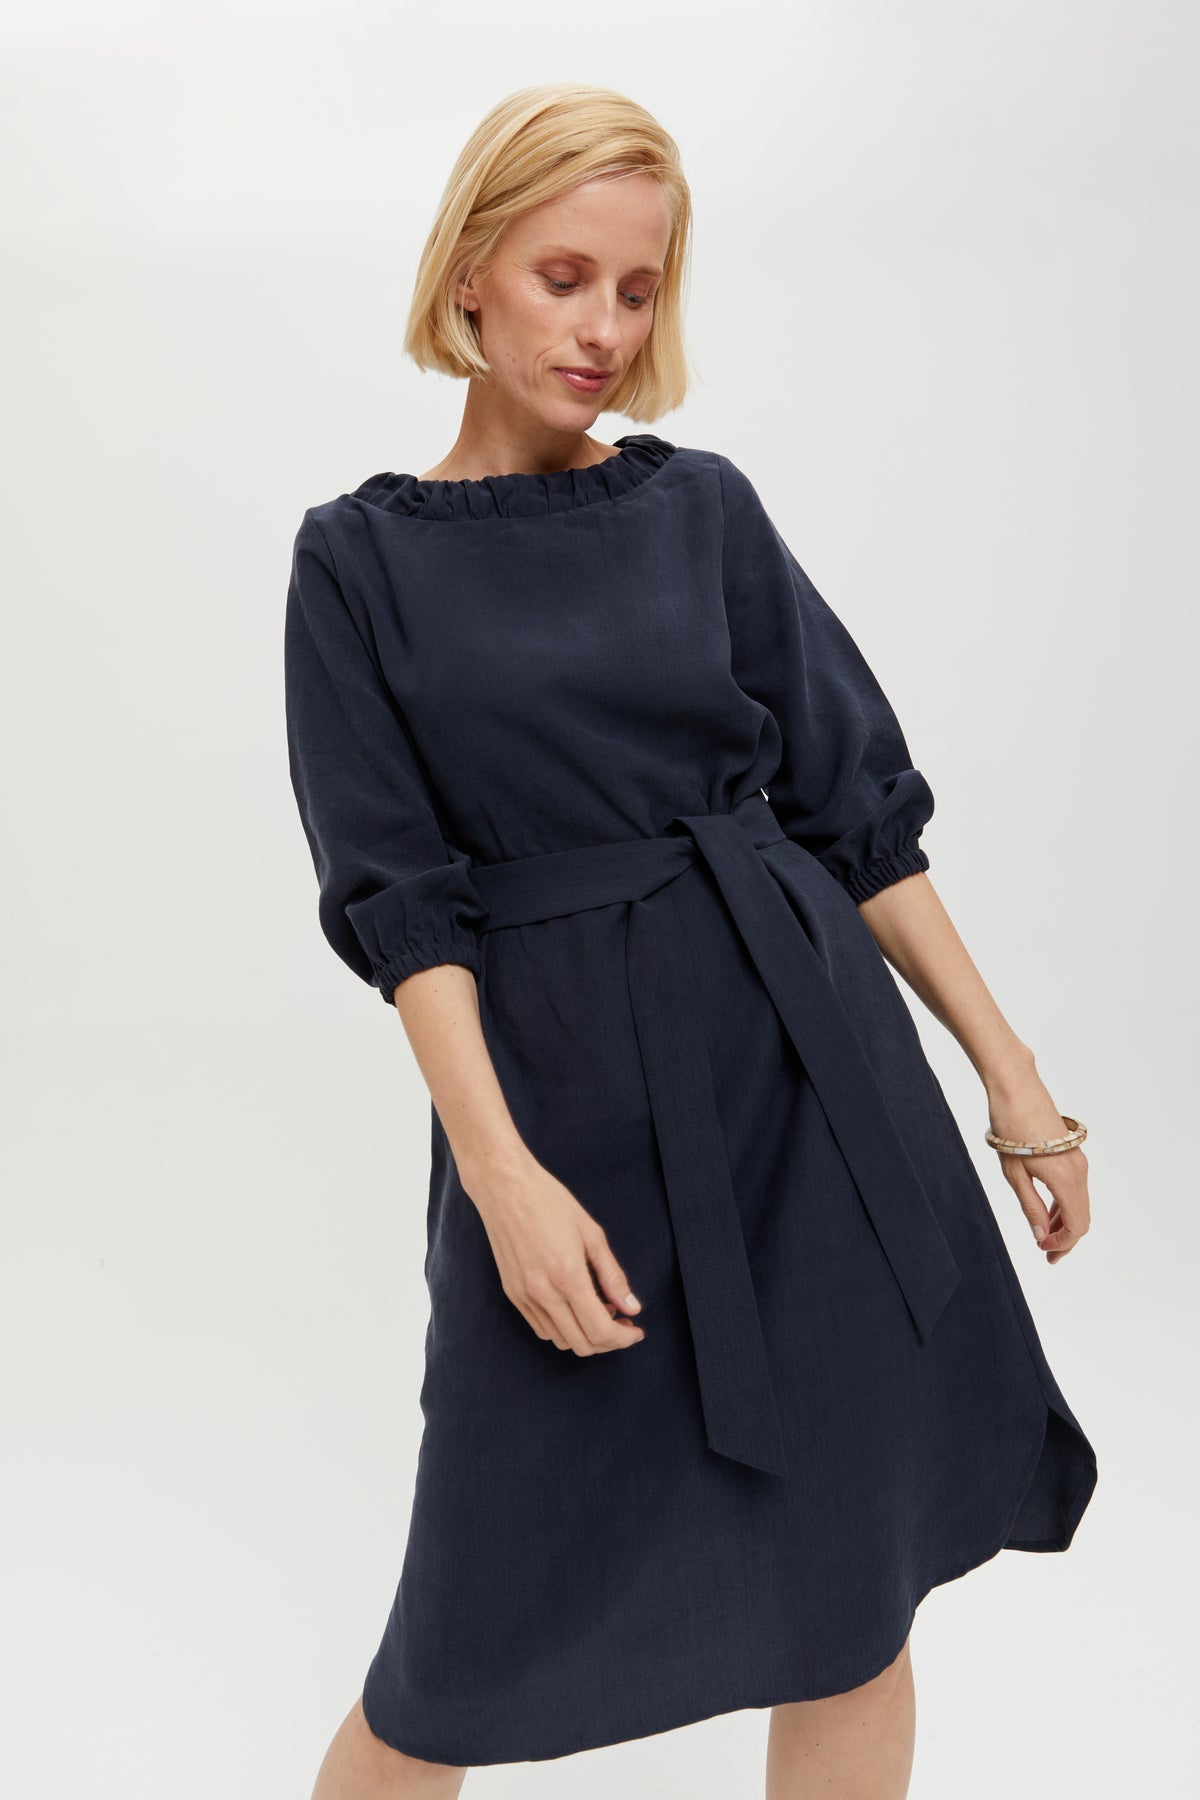 Celine | Elegant belted dress with cutout element in dark blue by Ayani